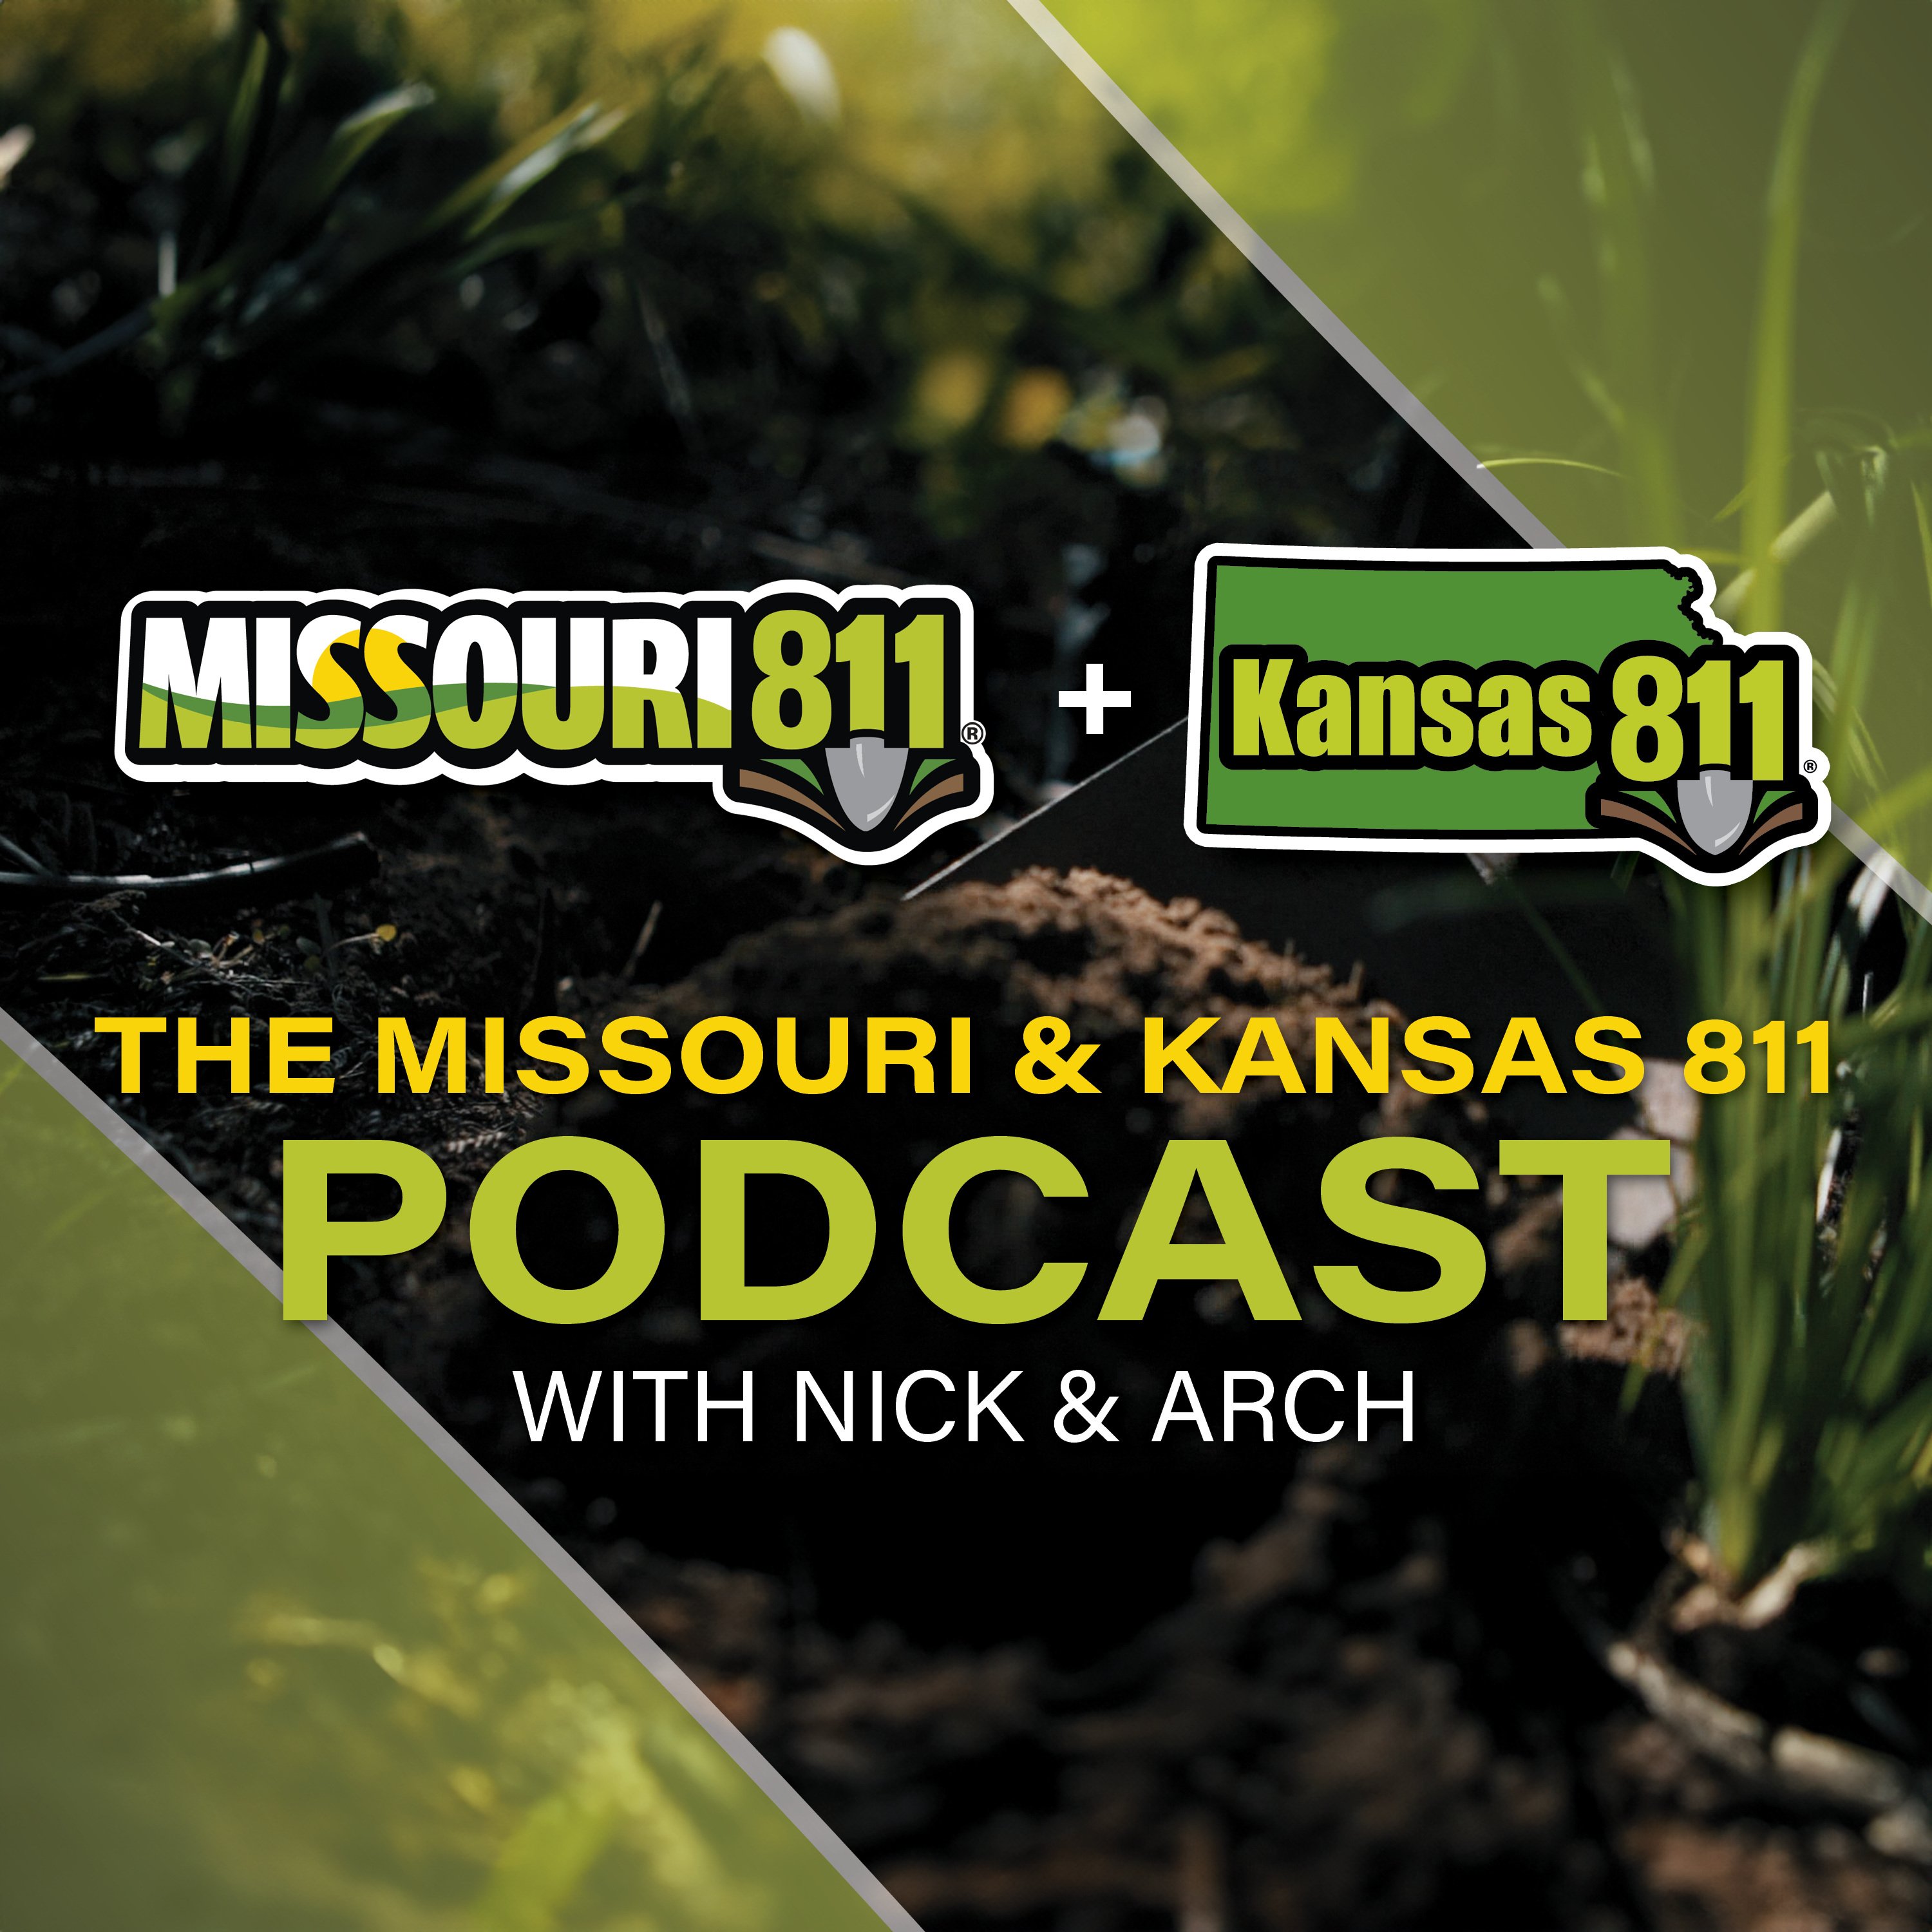 The Missouri & Kansas 811 Podcast with Nick and Arch